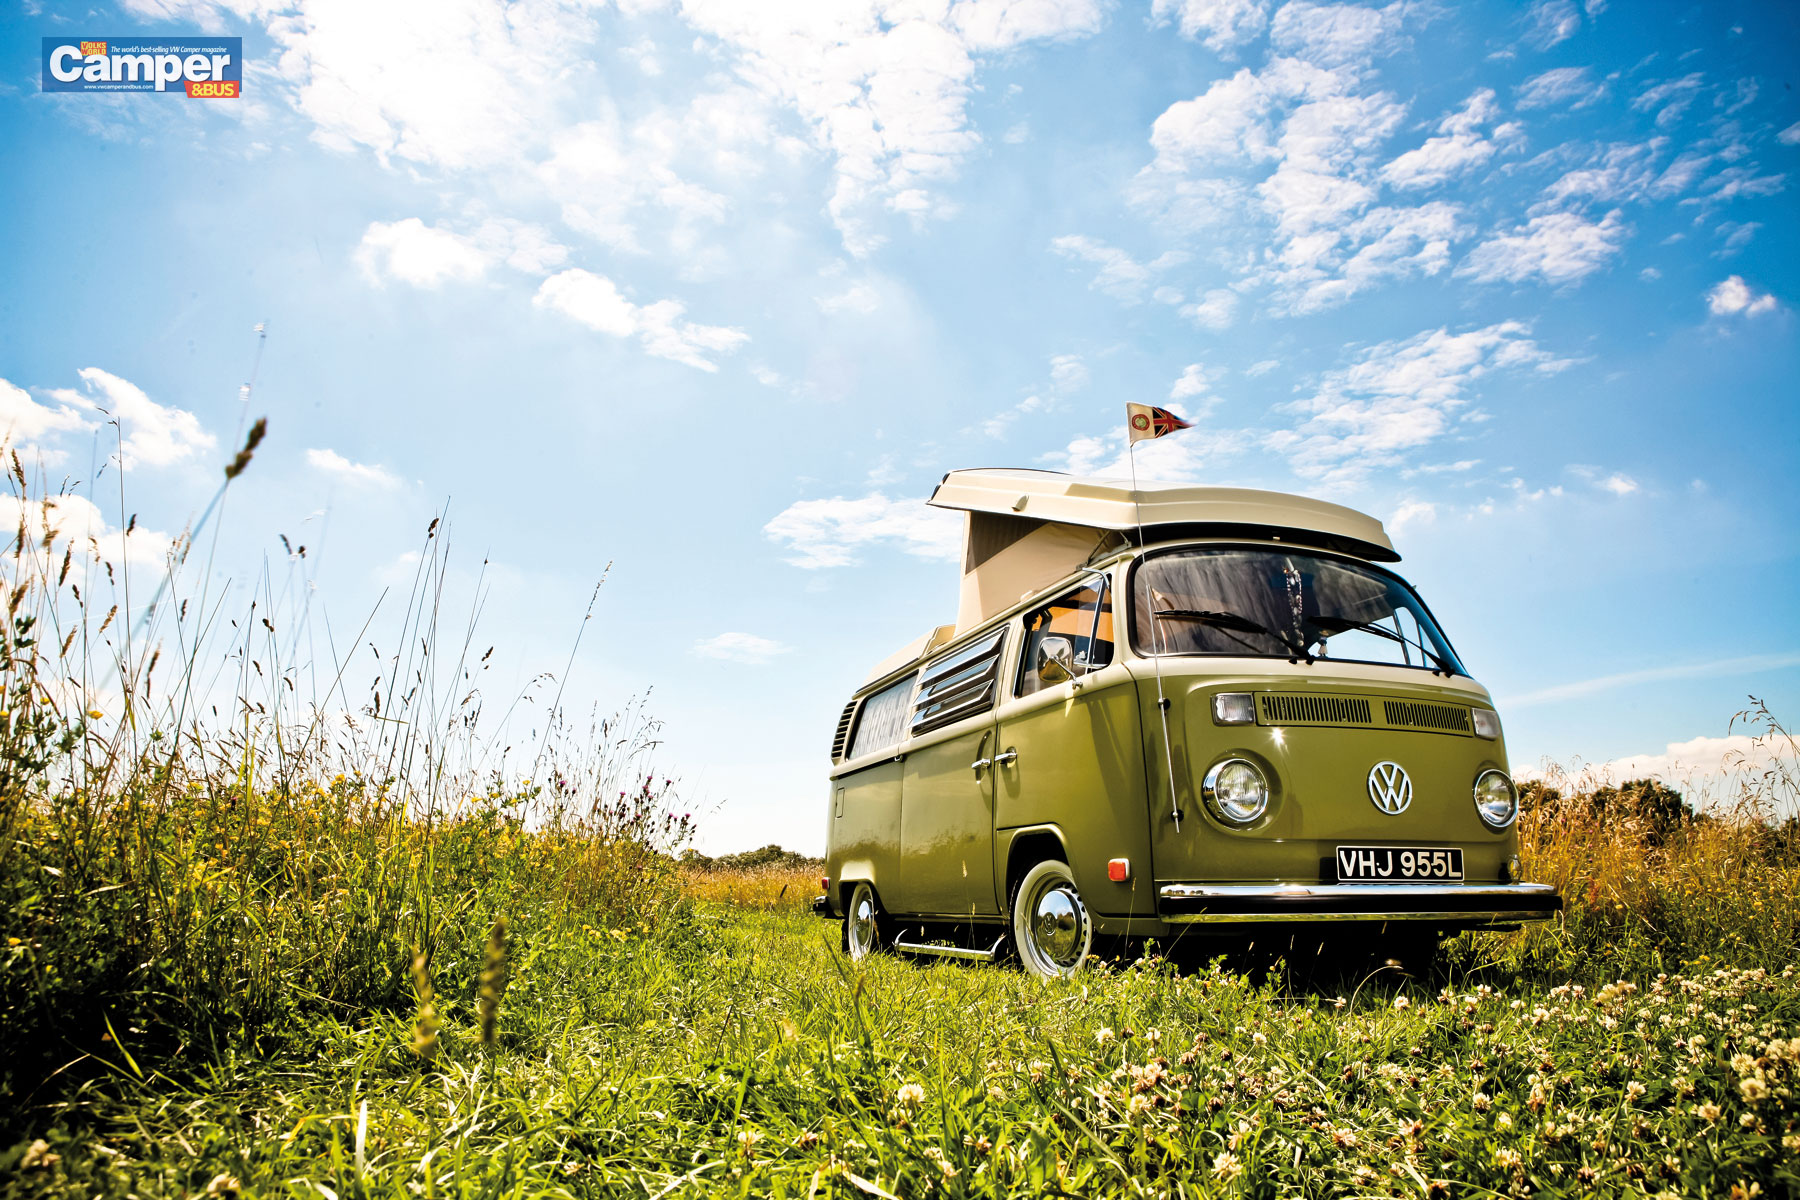 Camper Bus Wallpaper From The October Issue Vw And